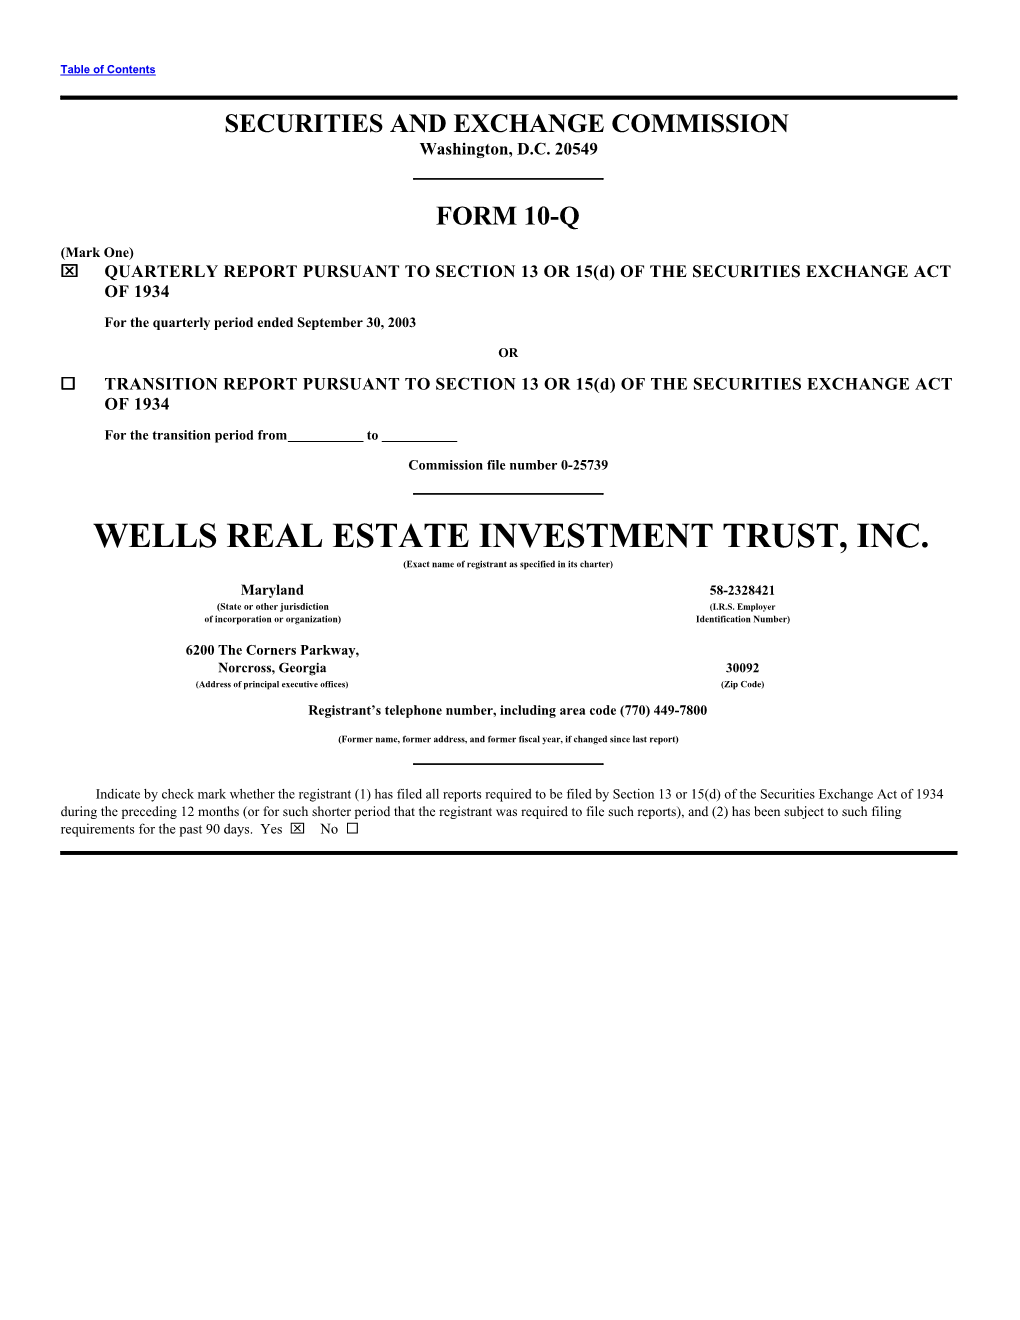 WELLS REAL ESTATE INVESTMENT TRUST, INC. (Exact Name of Registrant As Specified in Its Charter)